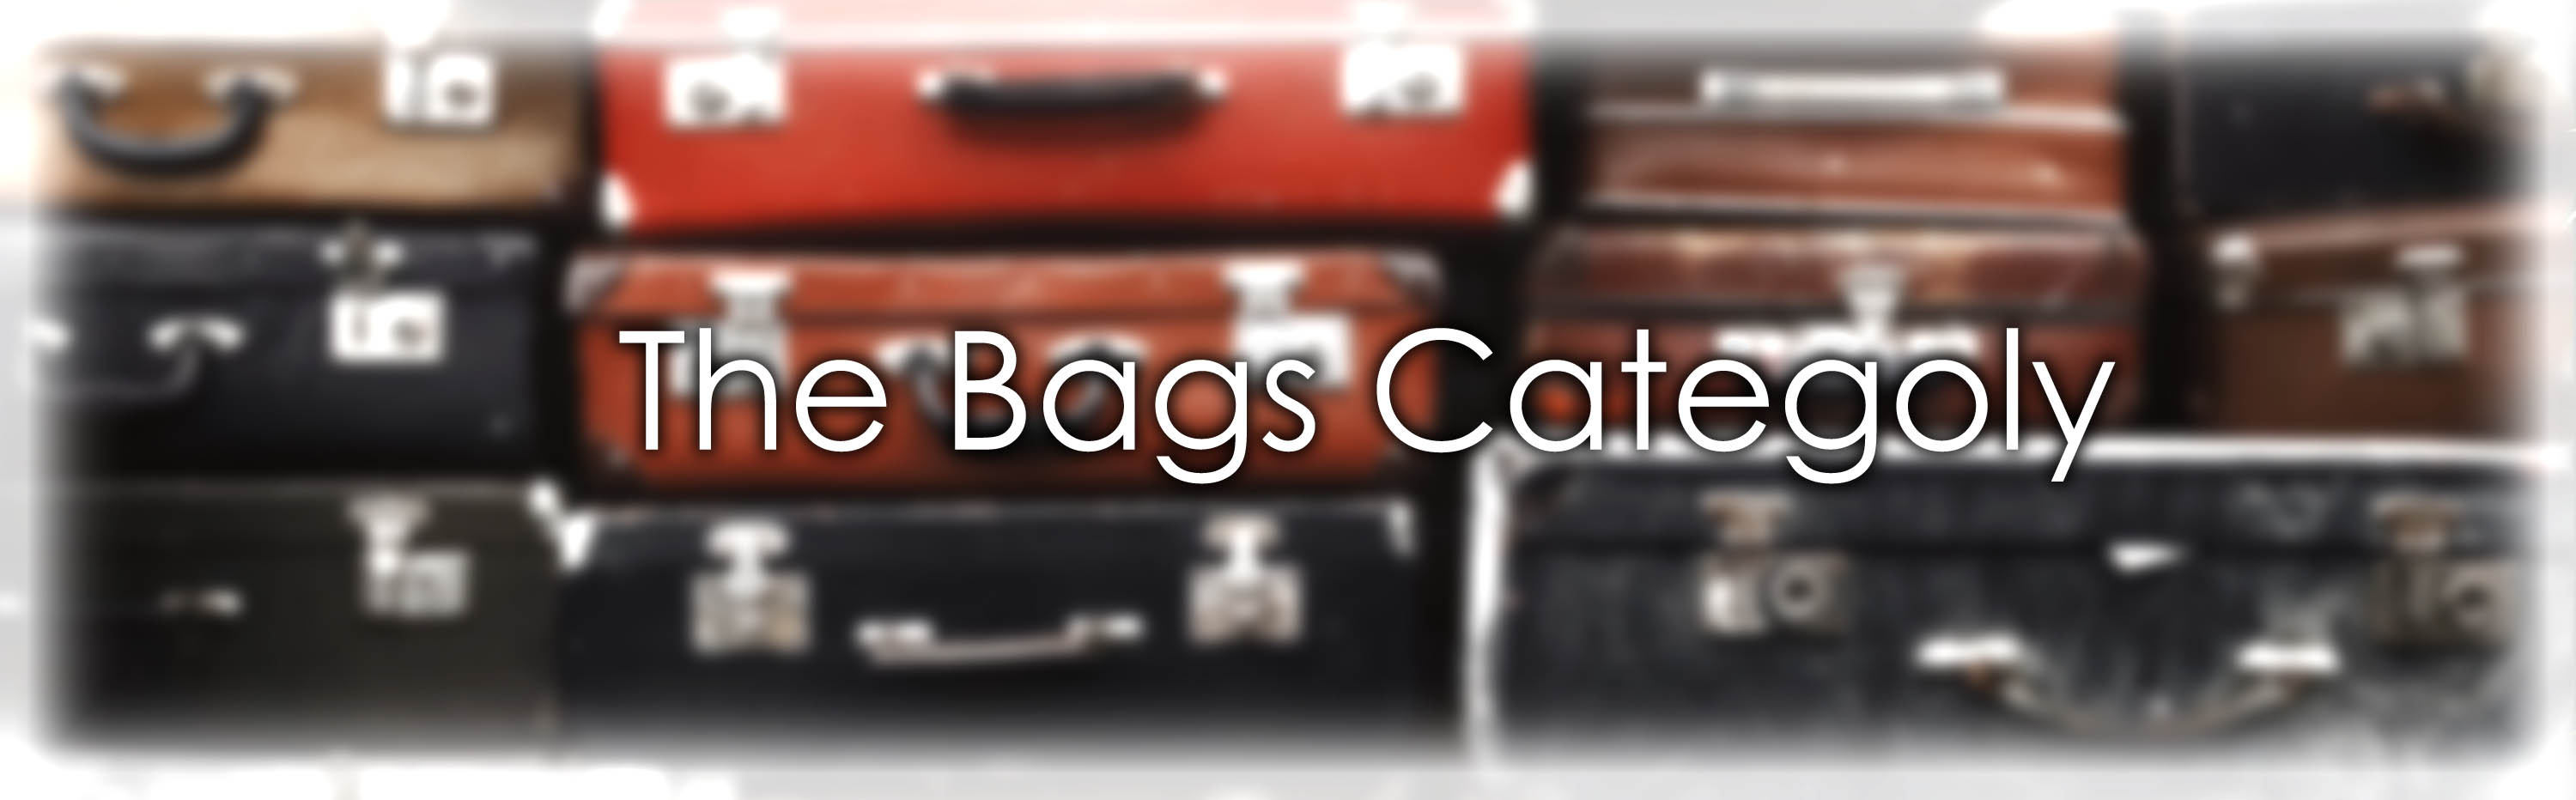 Bags Category